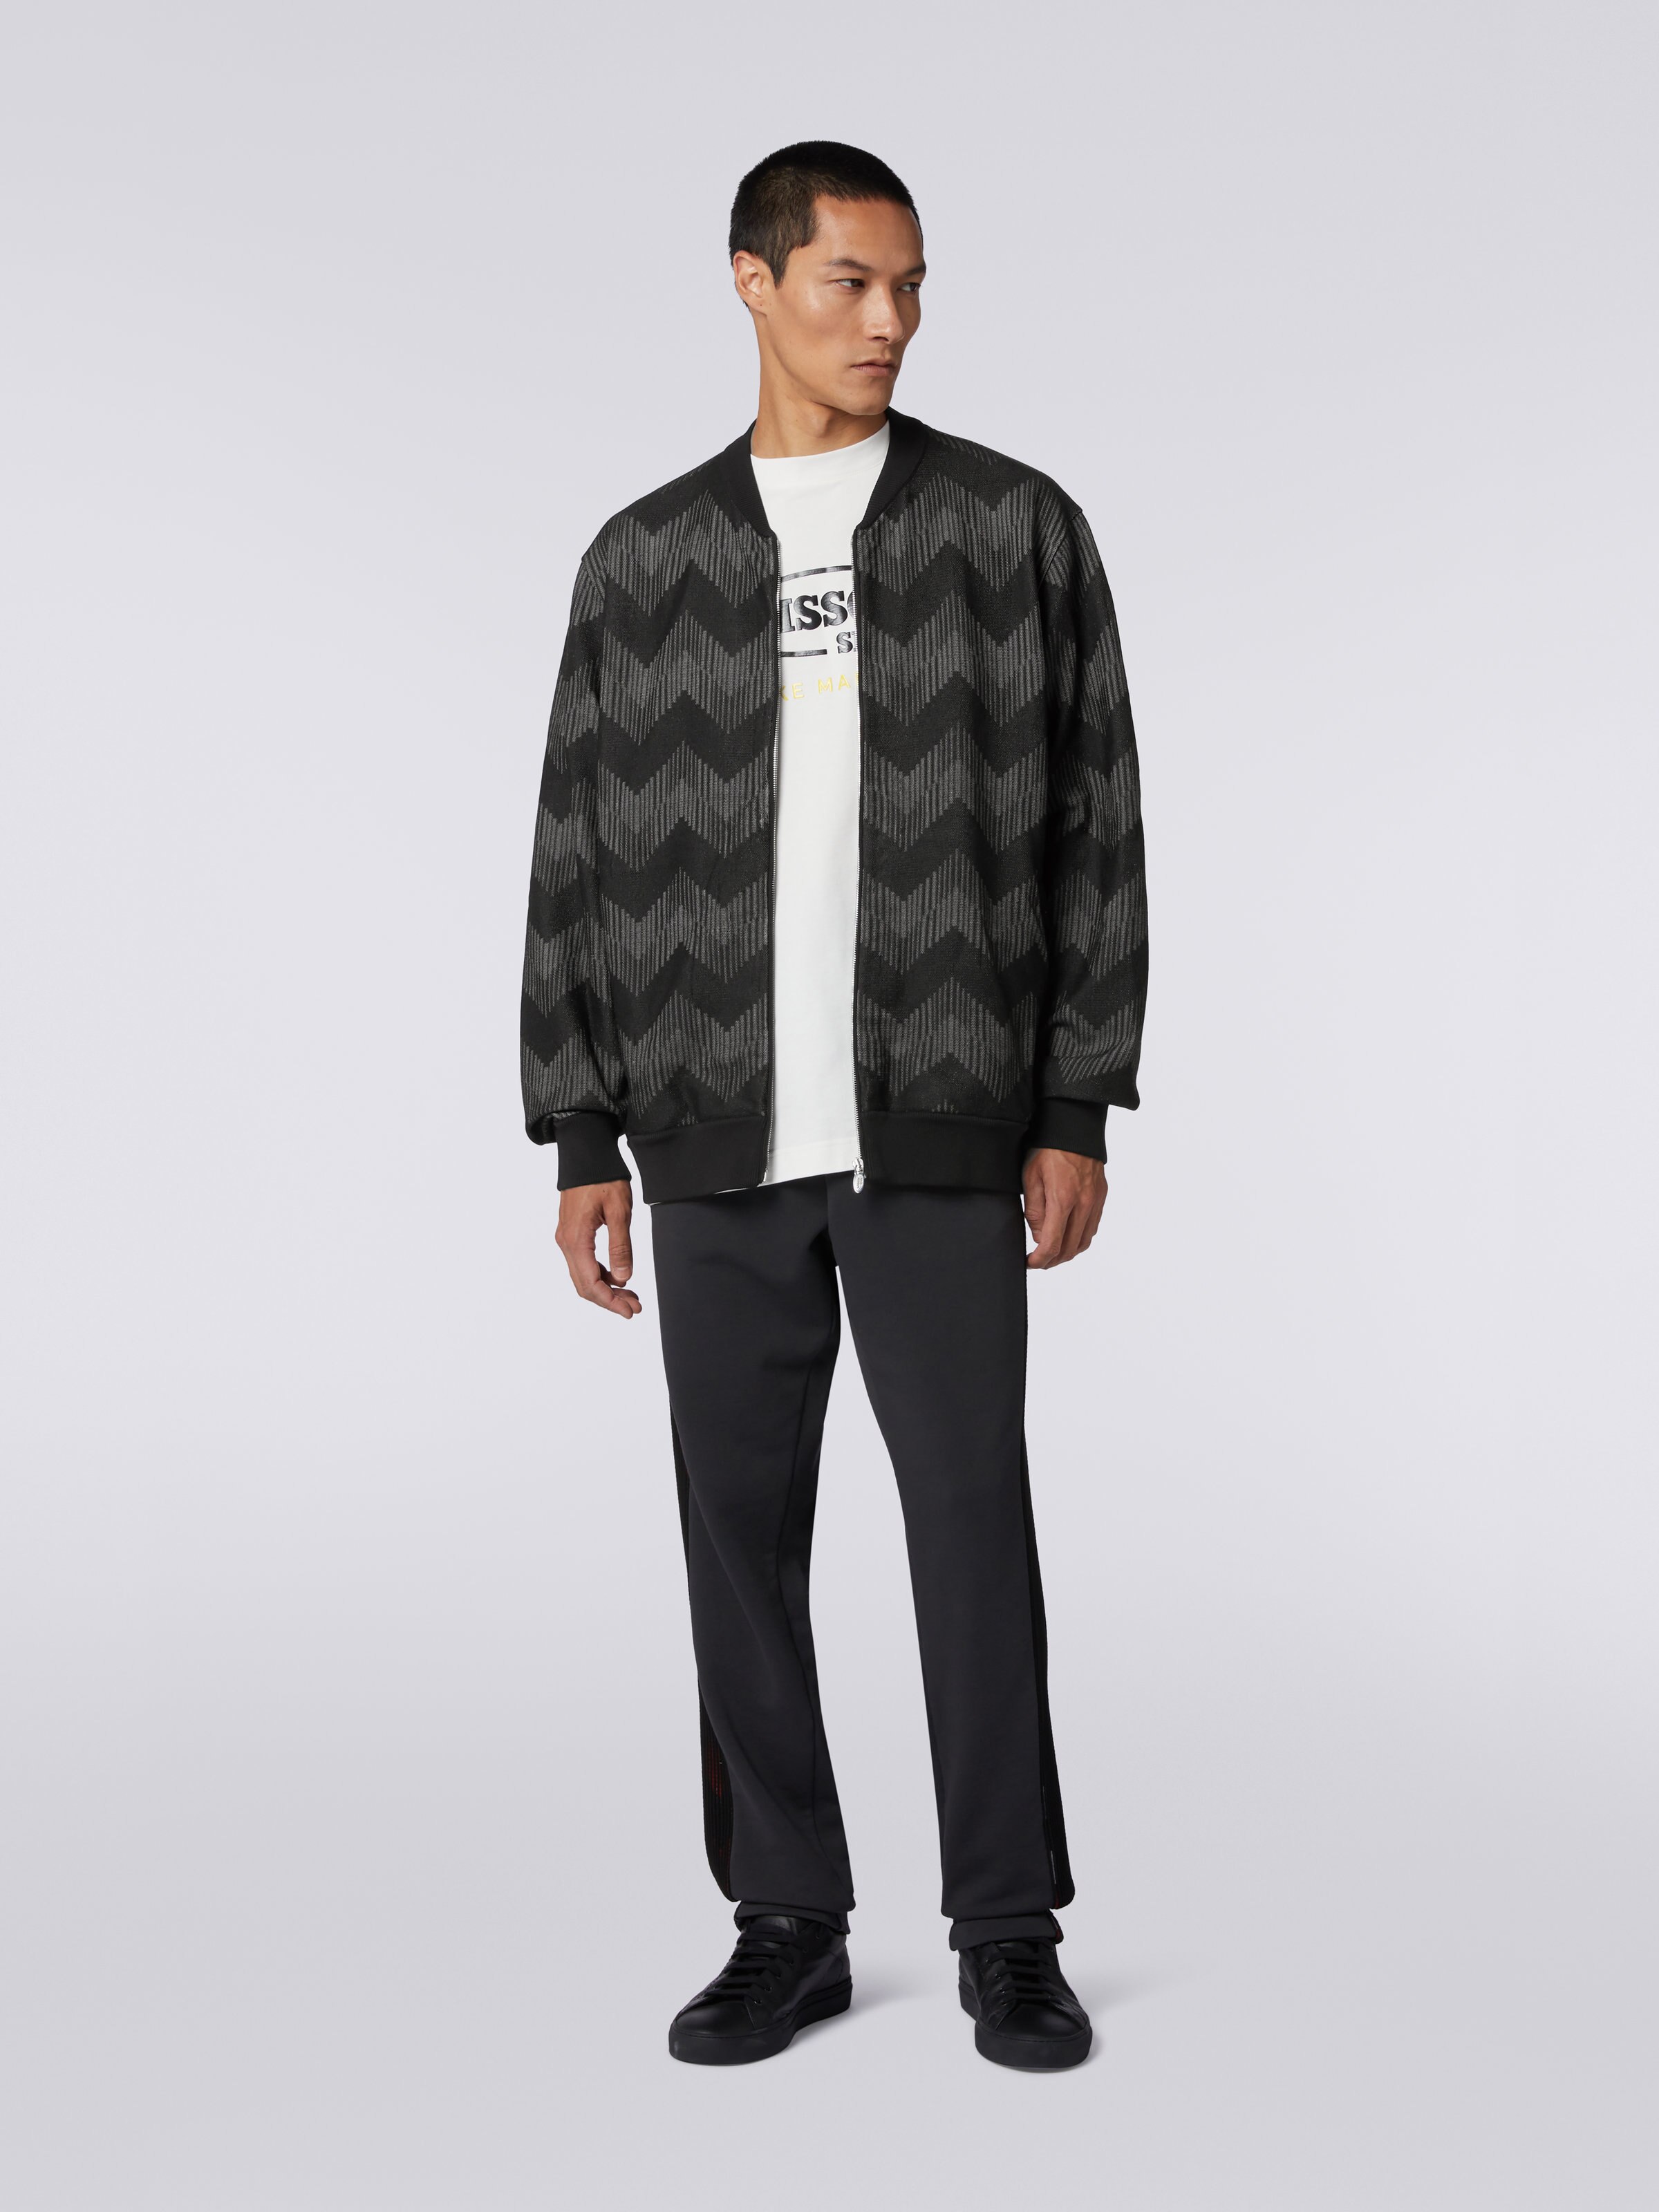 Cotton blend zigzag bomber jacket in collaboration with Mike Maignan, Black & White - 1